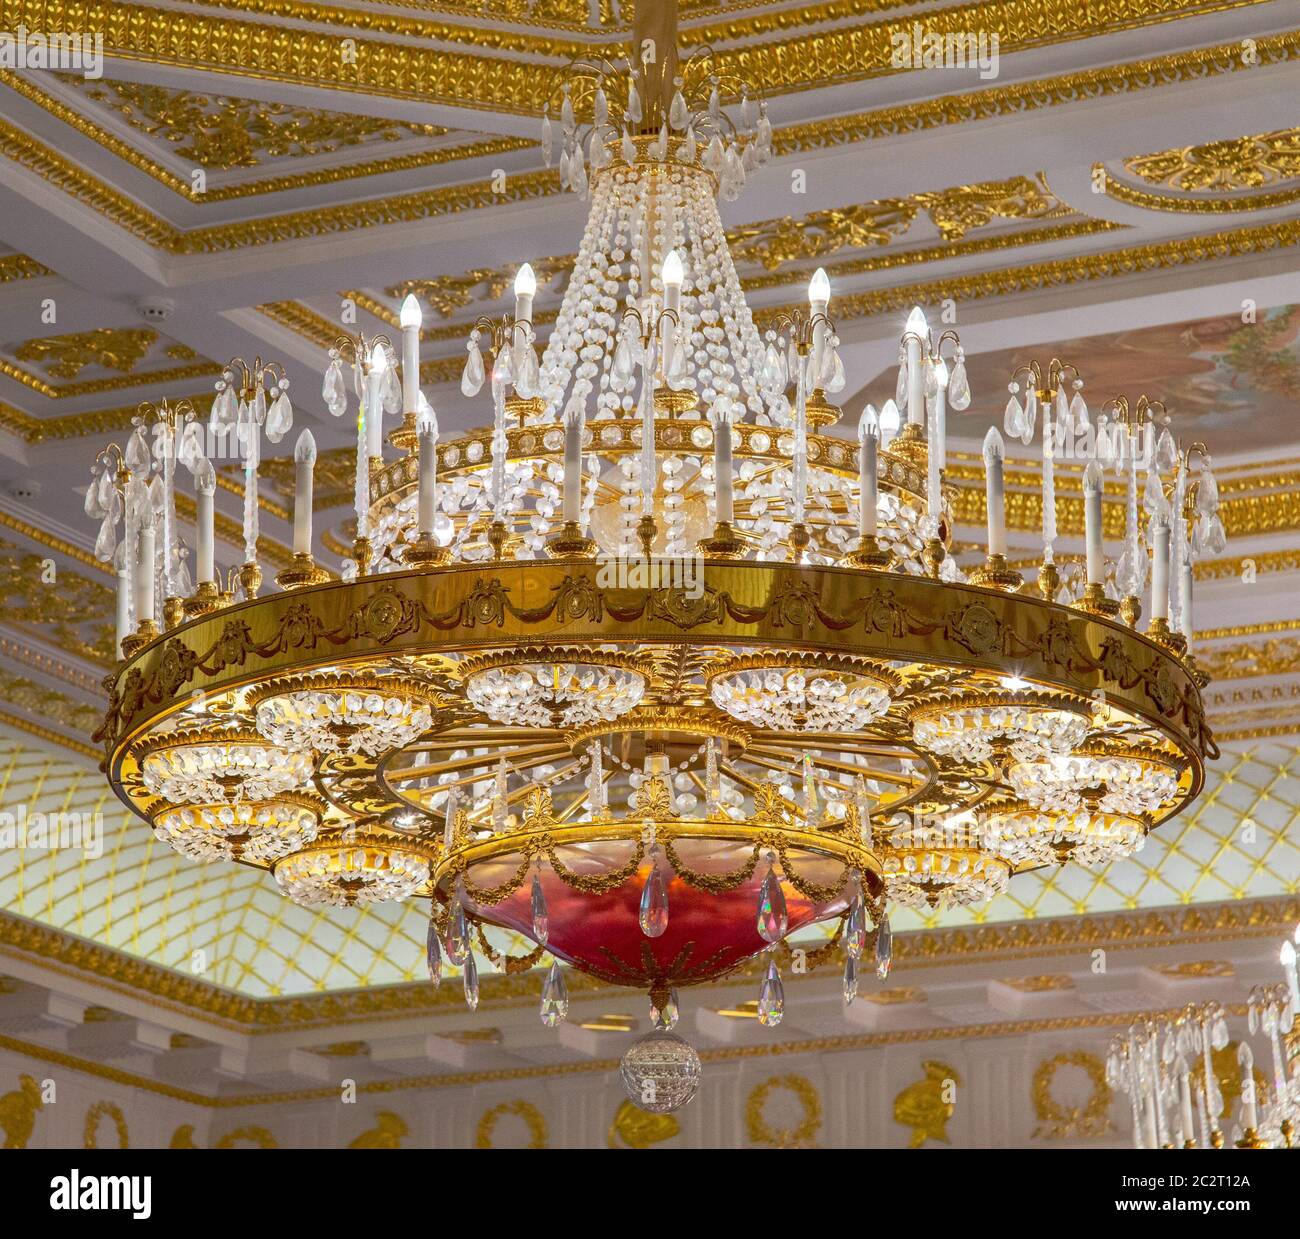 Moscow, Russia, 23 October 2019: Big bronze chandelier in Tavrichesky hall interior in State historical and architectural museum Stock Photo